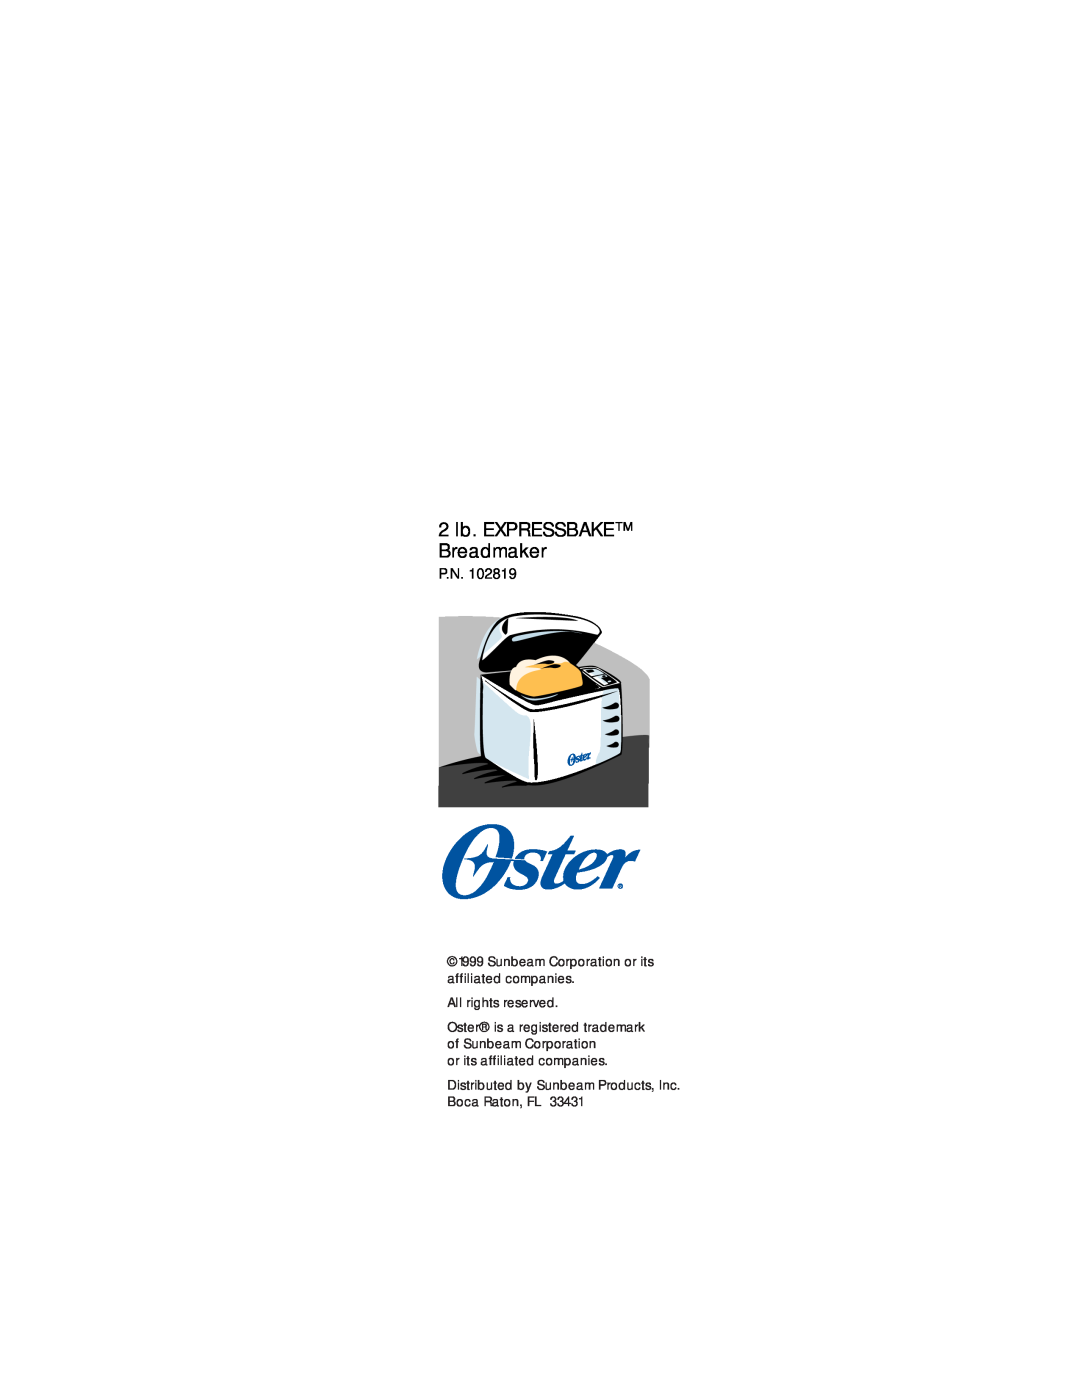 Oster Bread Maker 2 lb. EXPRESSBAKE Breadmaker, Sunbeam Corporation or its affiliated companies, All rights reserved 